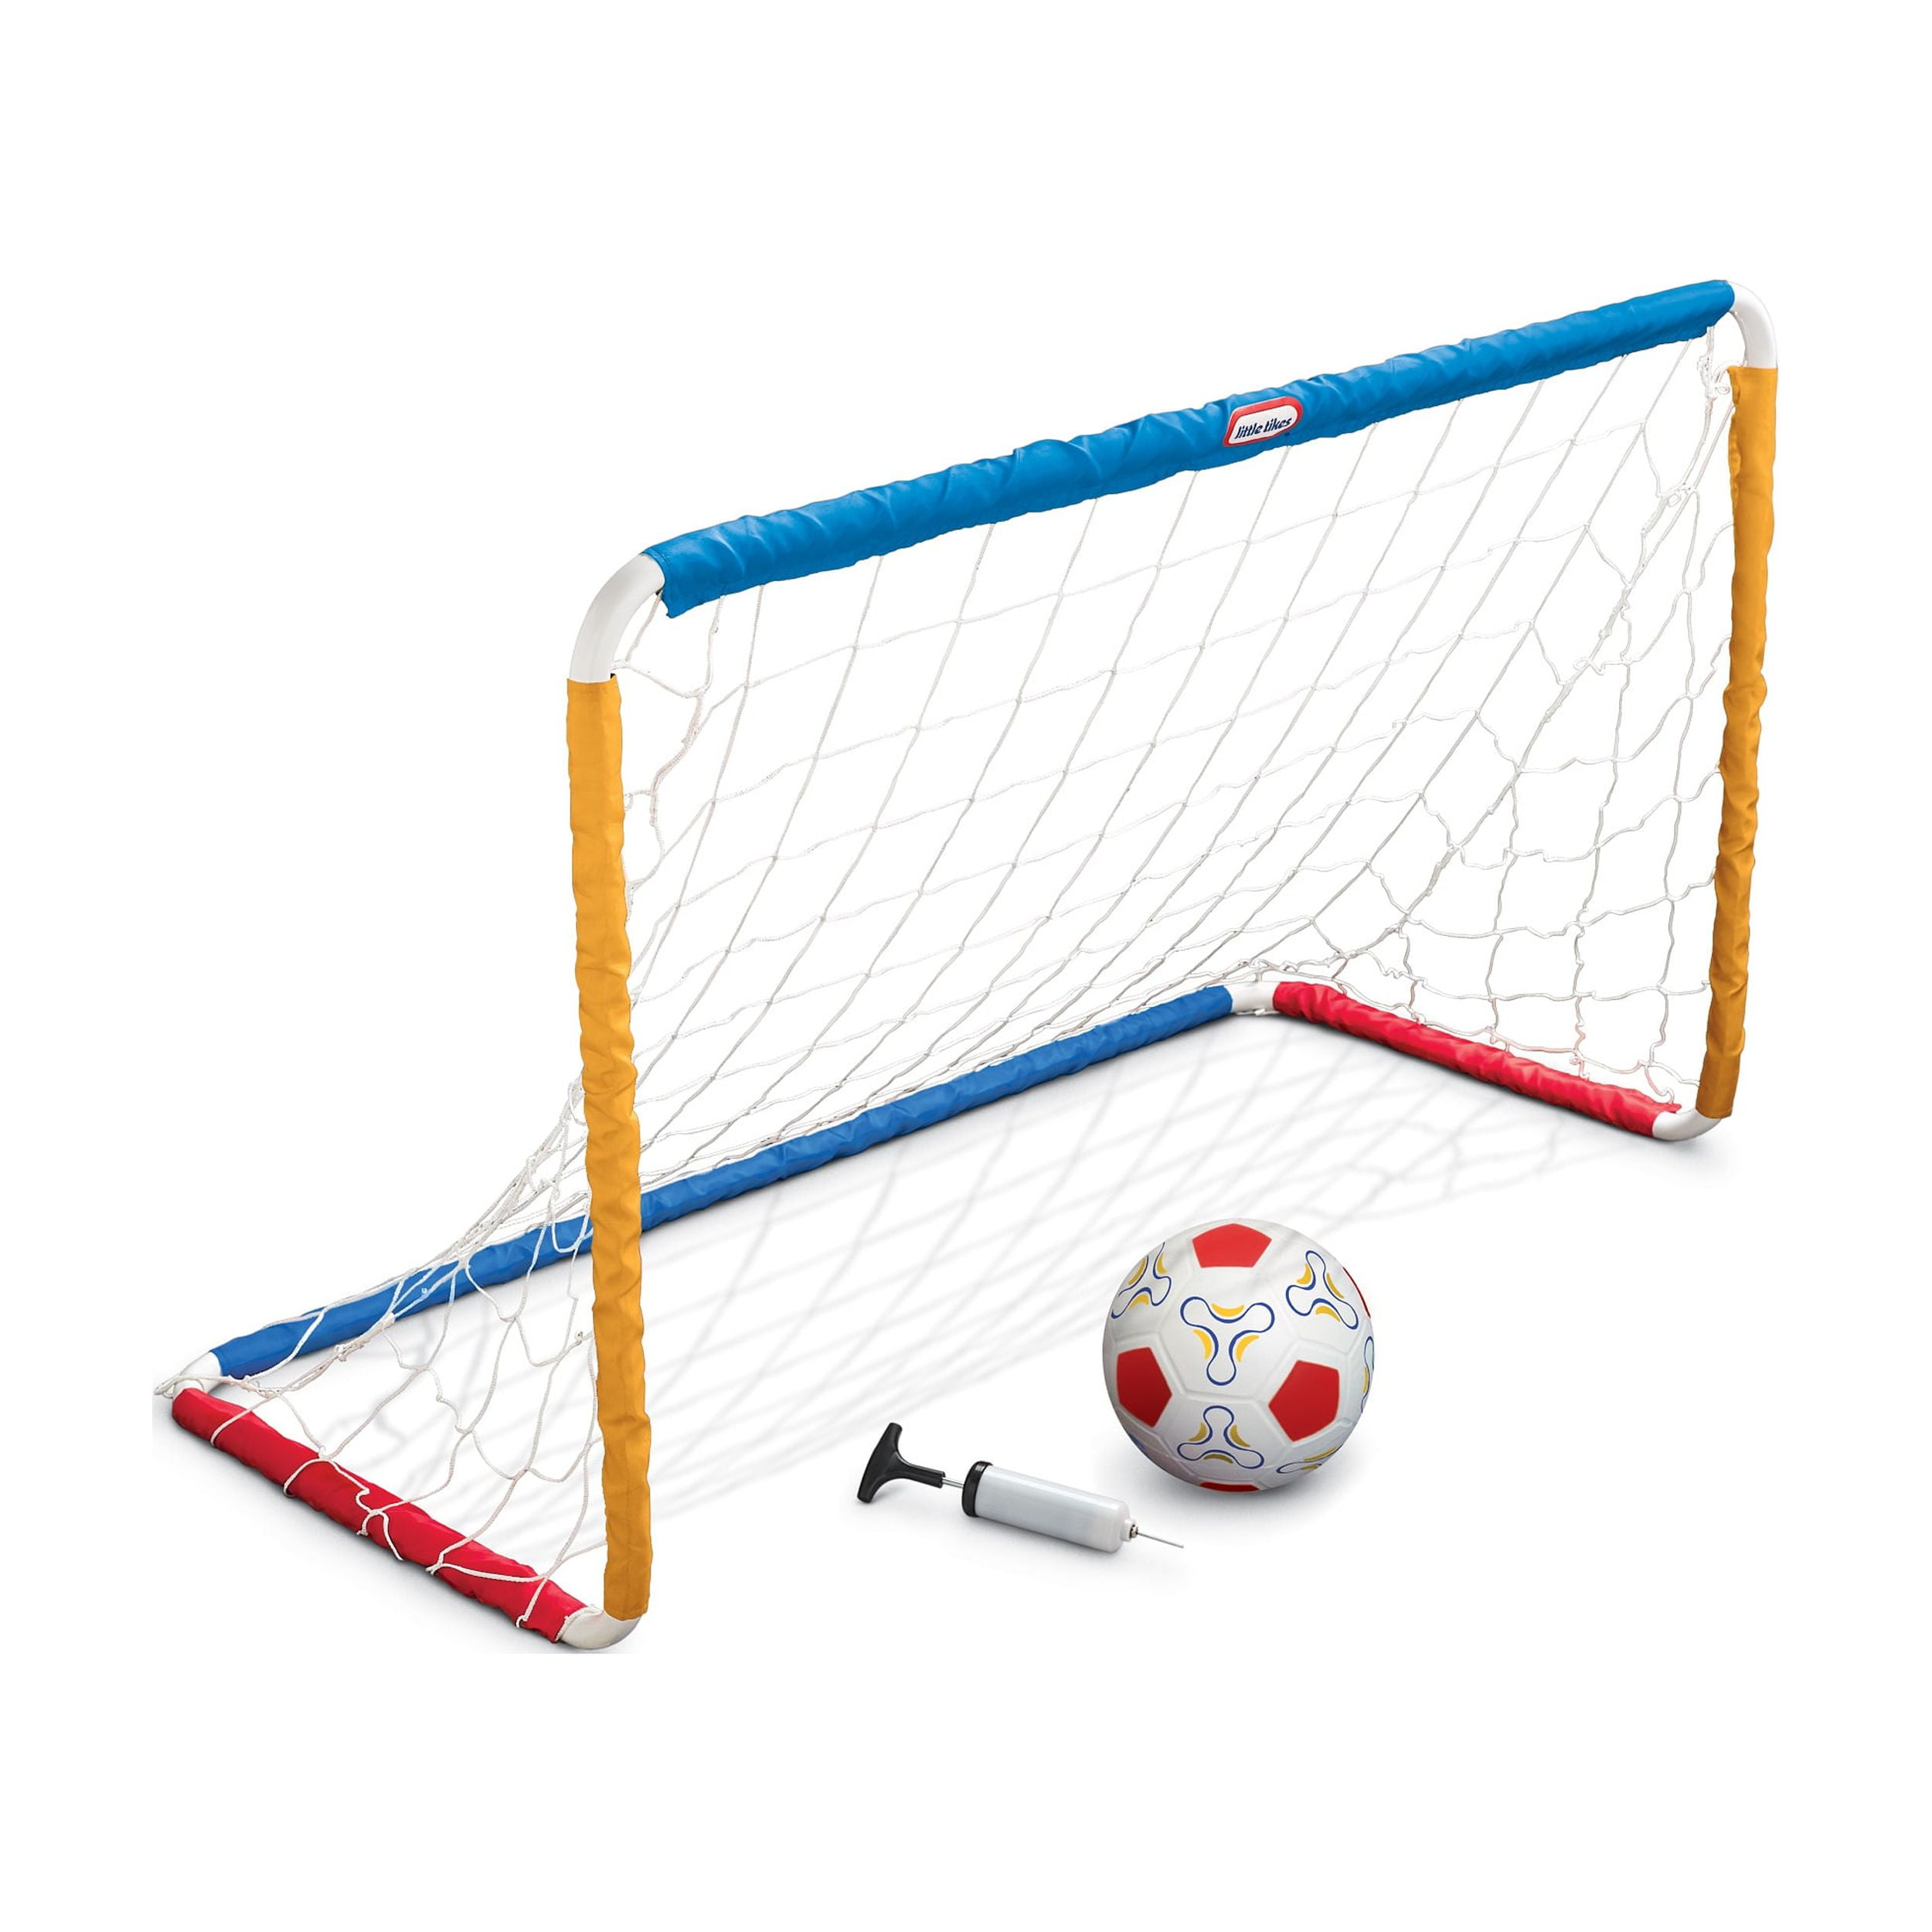 Little Tikes Easy Score Toy Soccer Set with Ball, Goal, and Pump